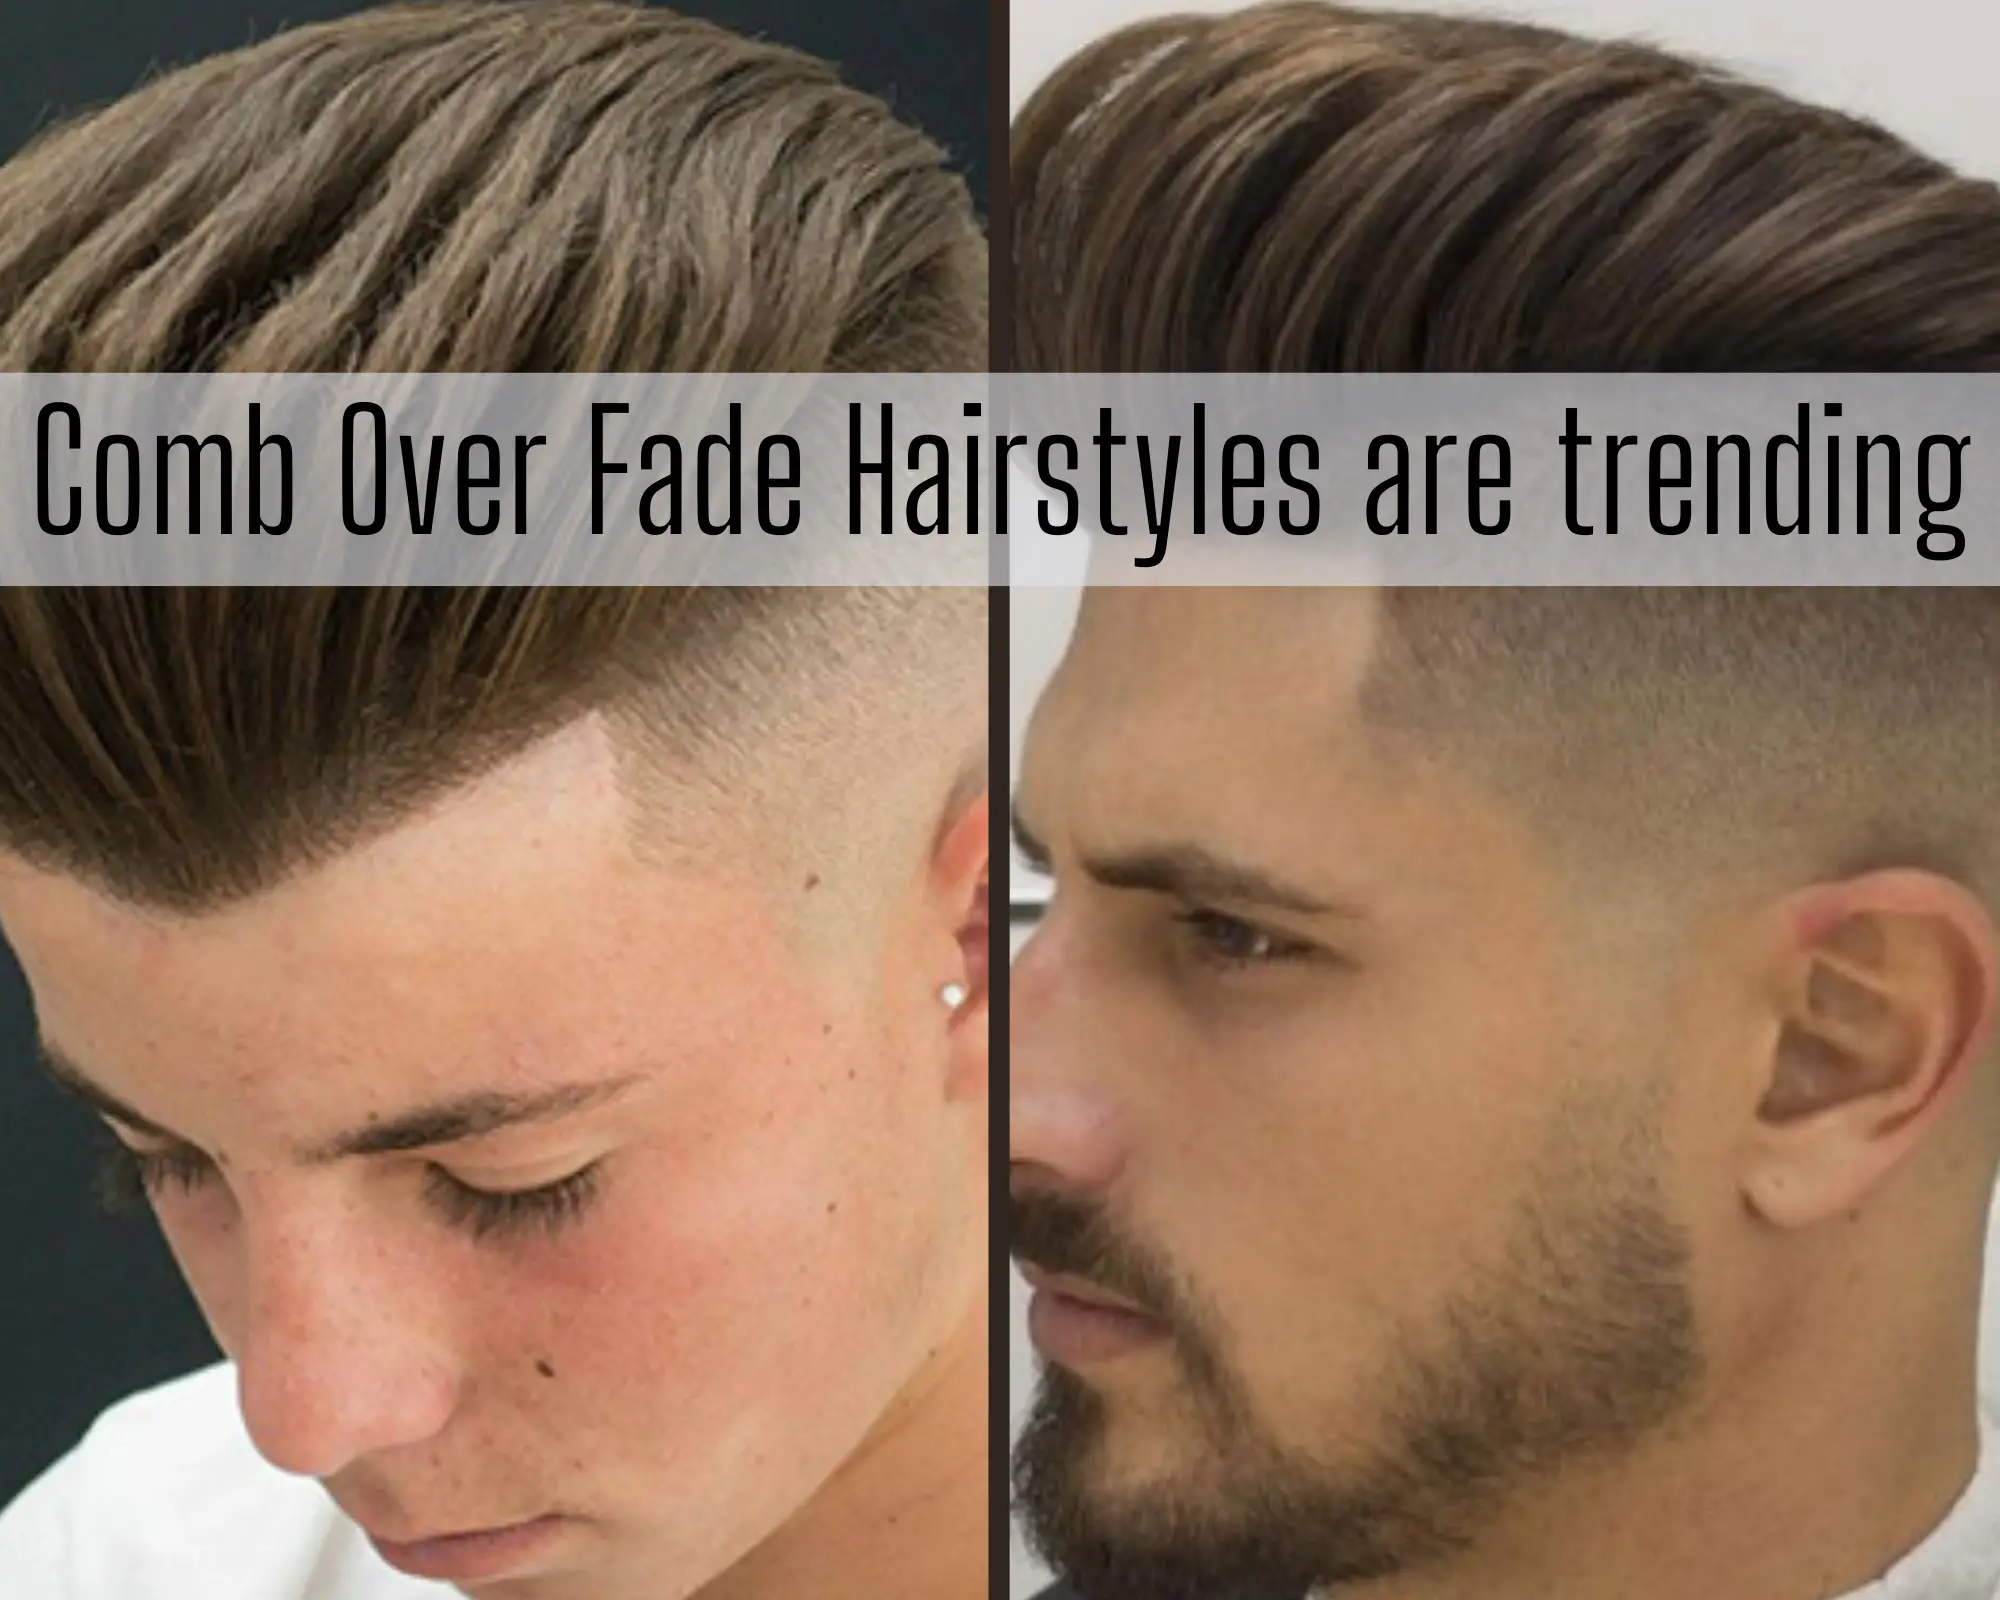 Comb Over Fade Hairstyles are trending